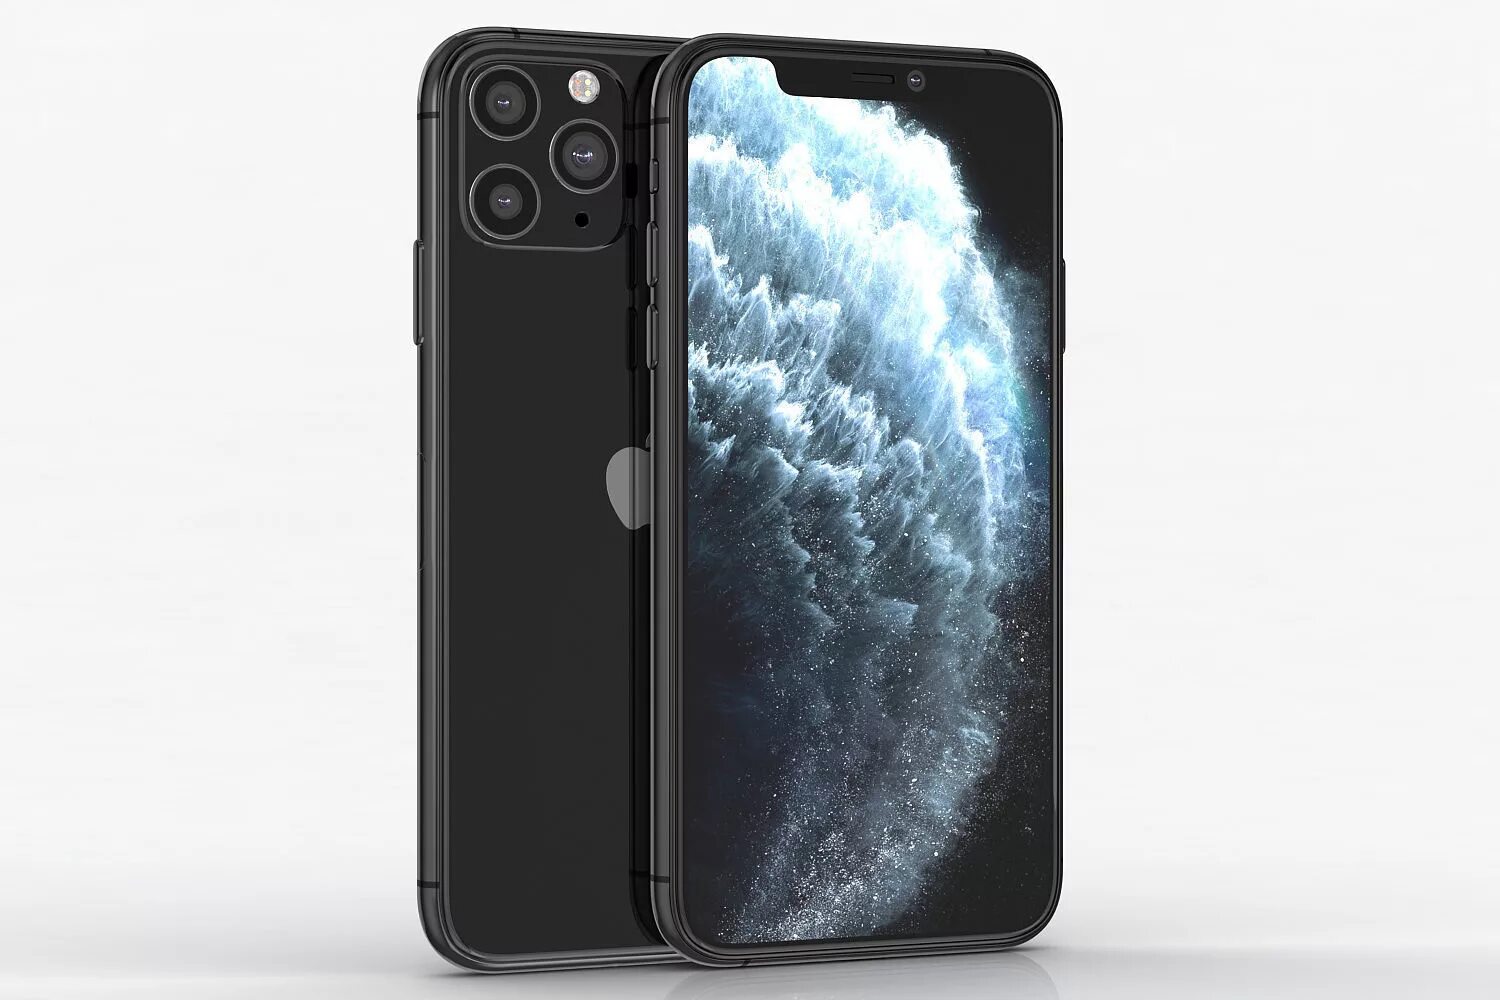 Iphone 11 pro 256. Iphone 11 Pro Max 256gb Space Gray. Iphone 11 Pro Max Space Grey. Apple iphone 11 Pro 256gb серый космос. Iphone 11 Pro Space Gray.